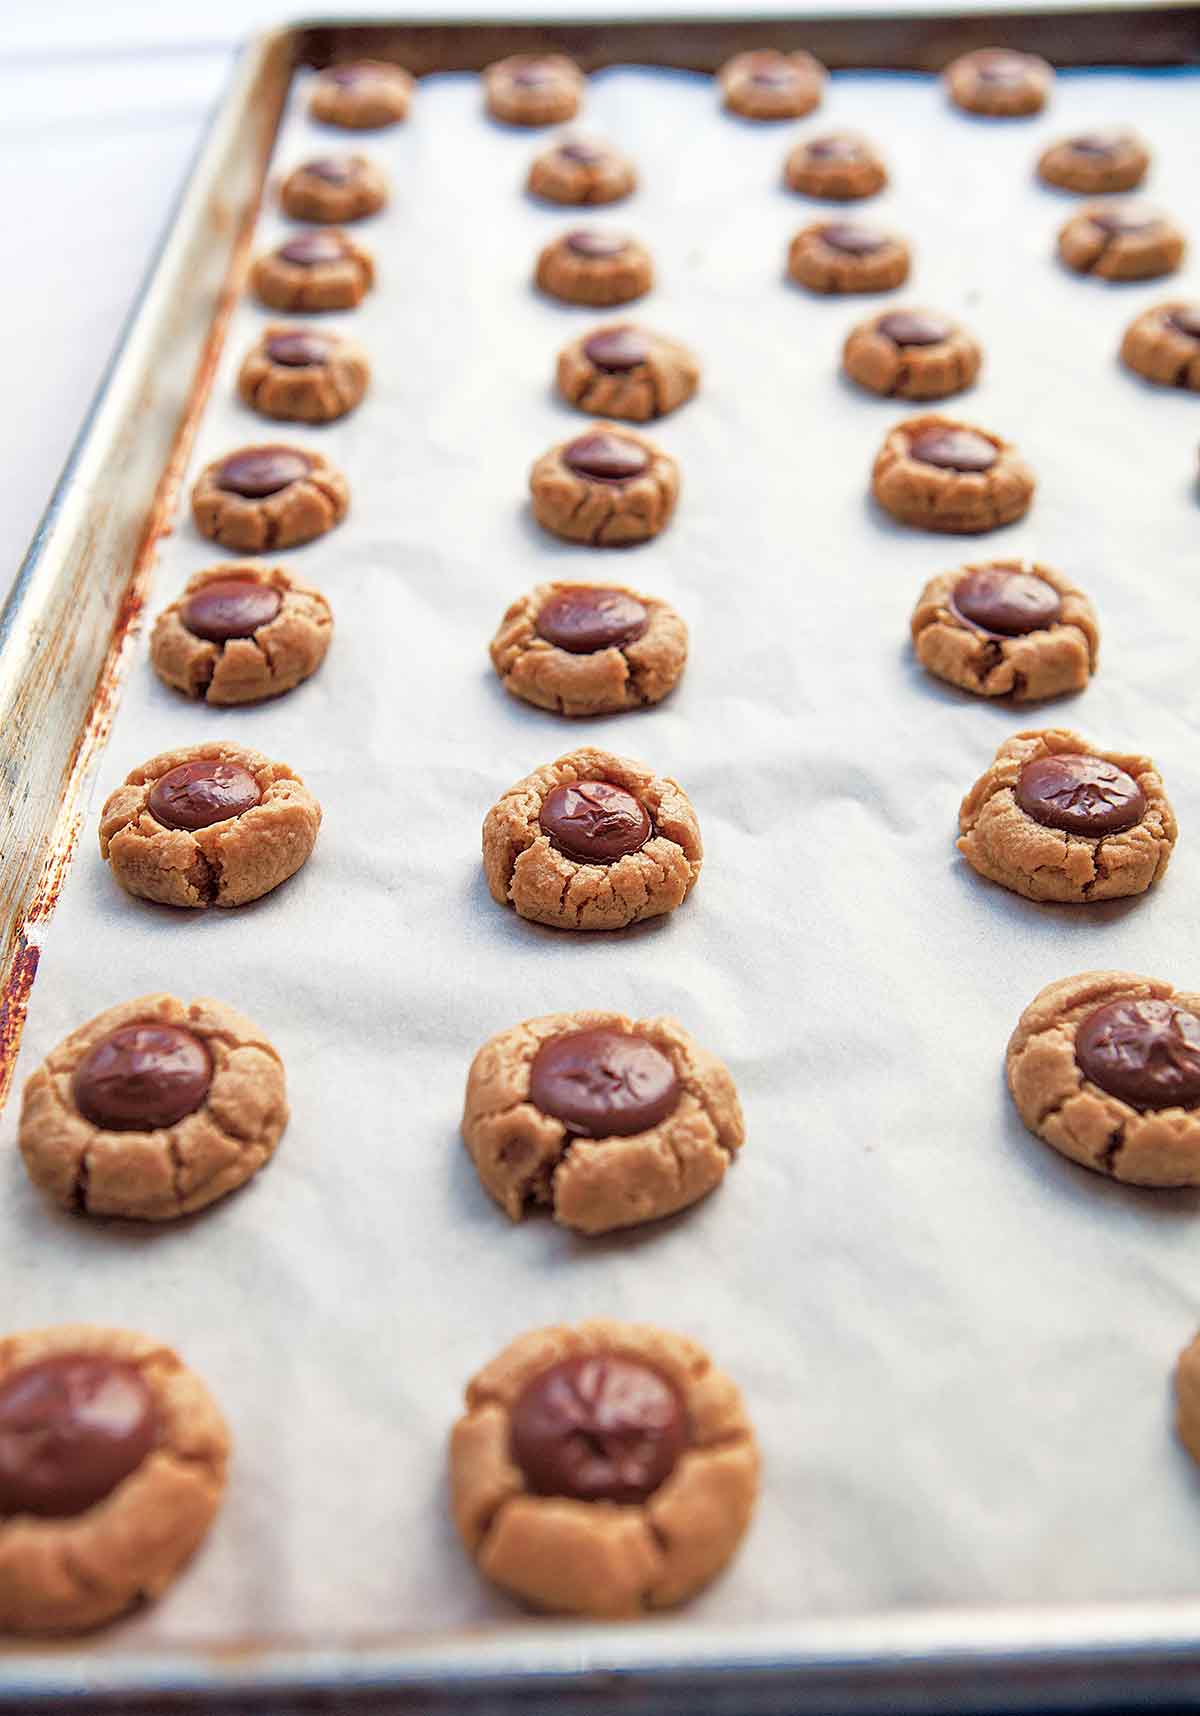 A parchment lined baking sheet filled with rows of round peanut butter cookies with chocolate centers.